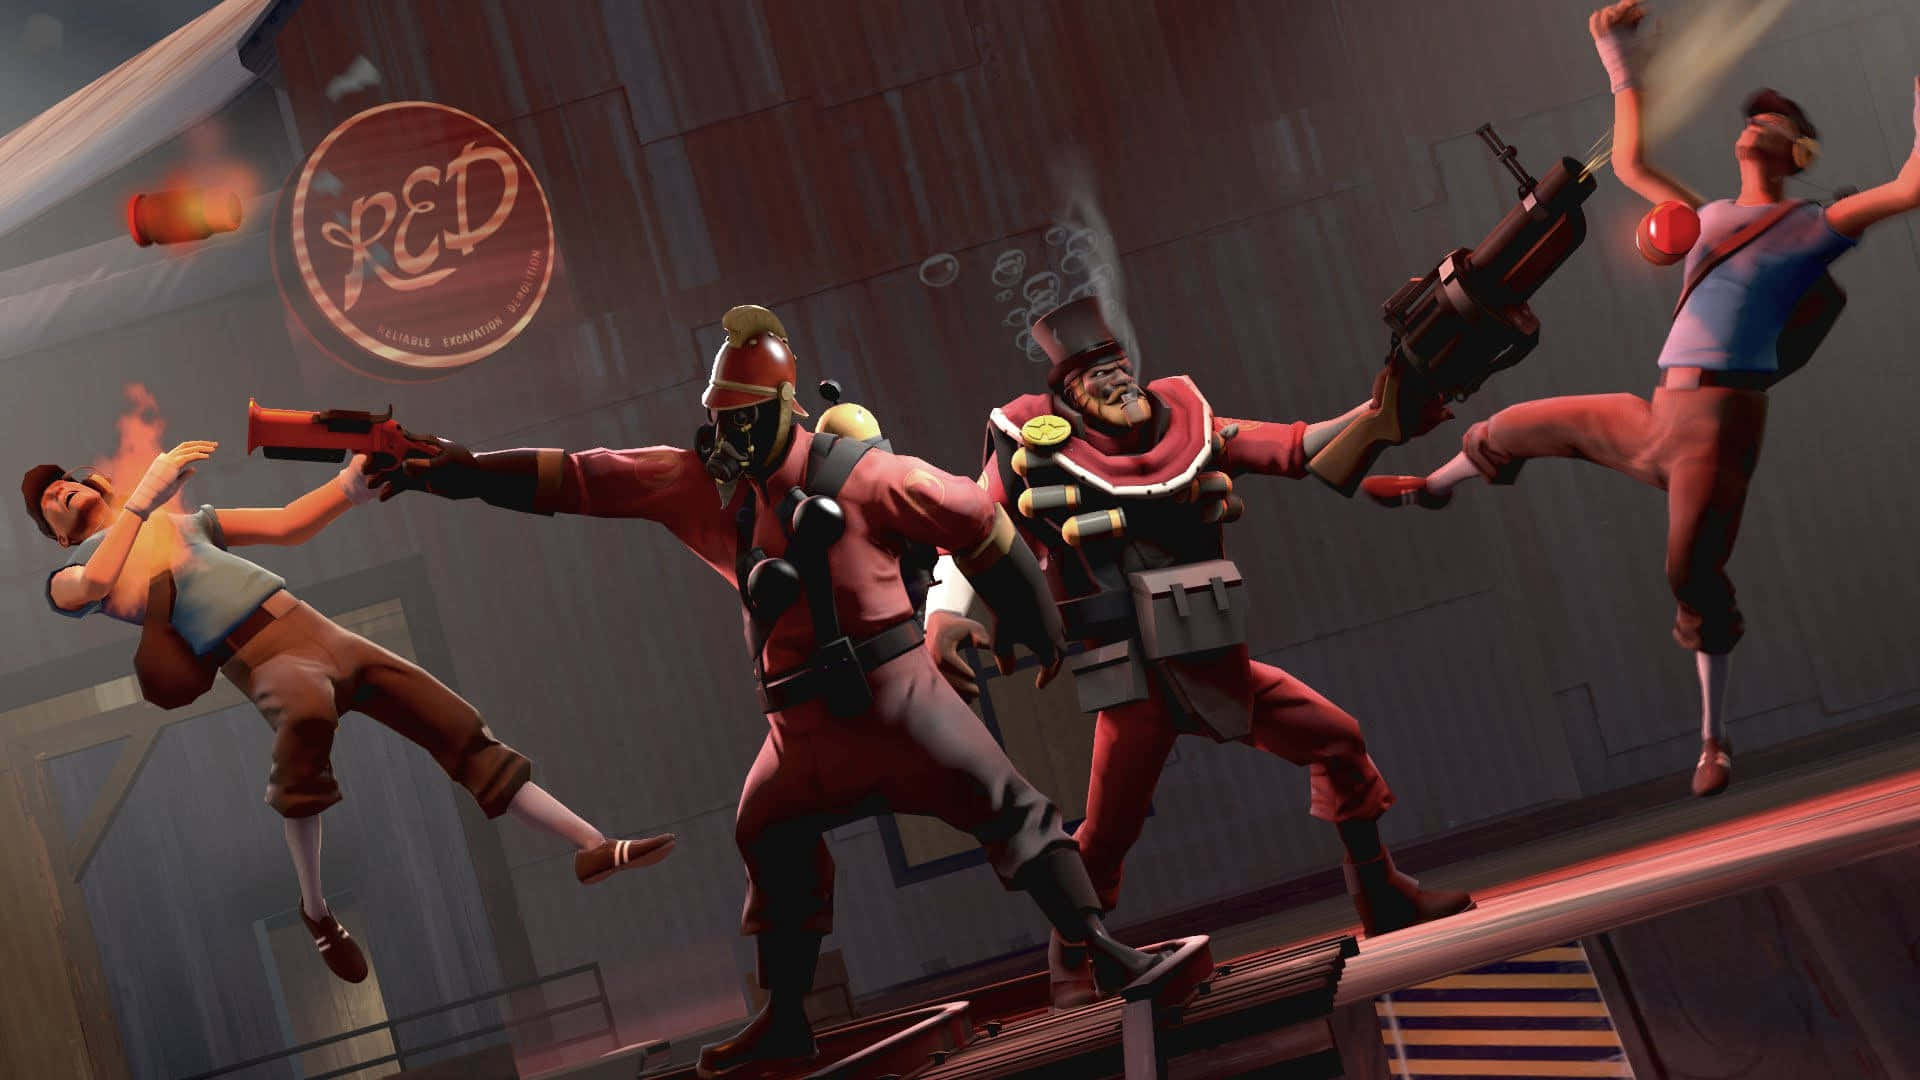 Join the battle with TF2